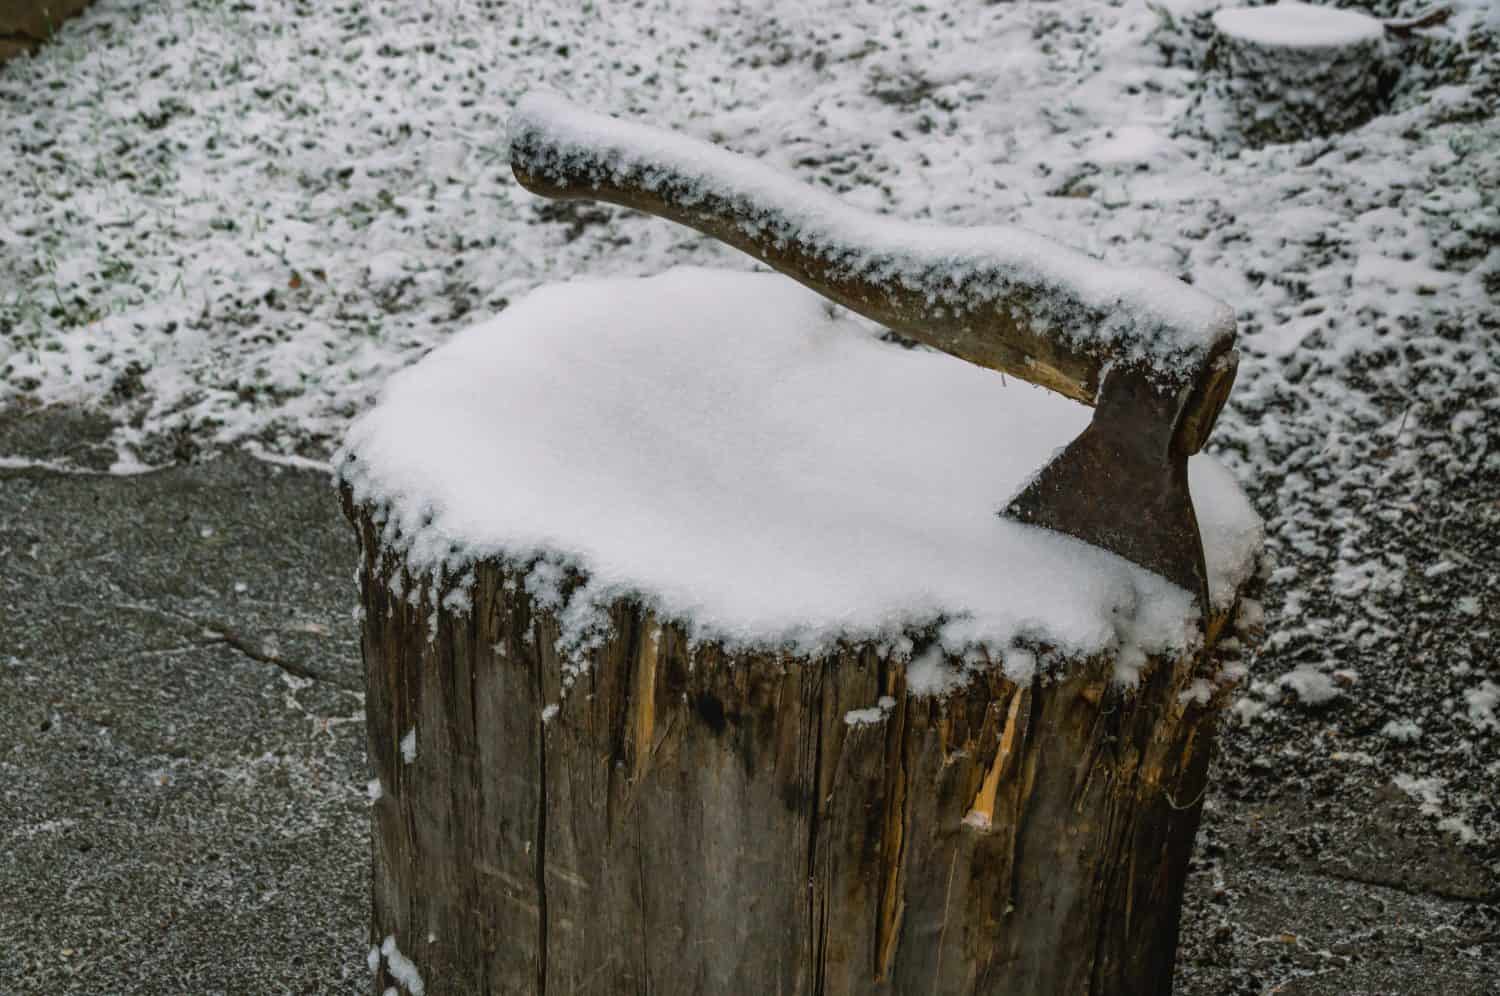 A snow-covered axe on a wooden block. Harvesting firewood for heating in the village in winter. Life in the countryside in winter.